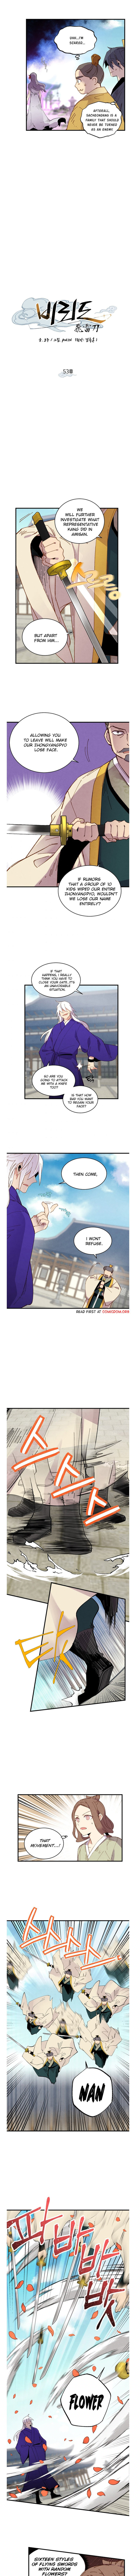 Lightning Degree - Chapter 53 Page 4